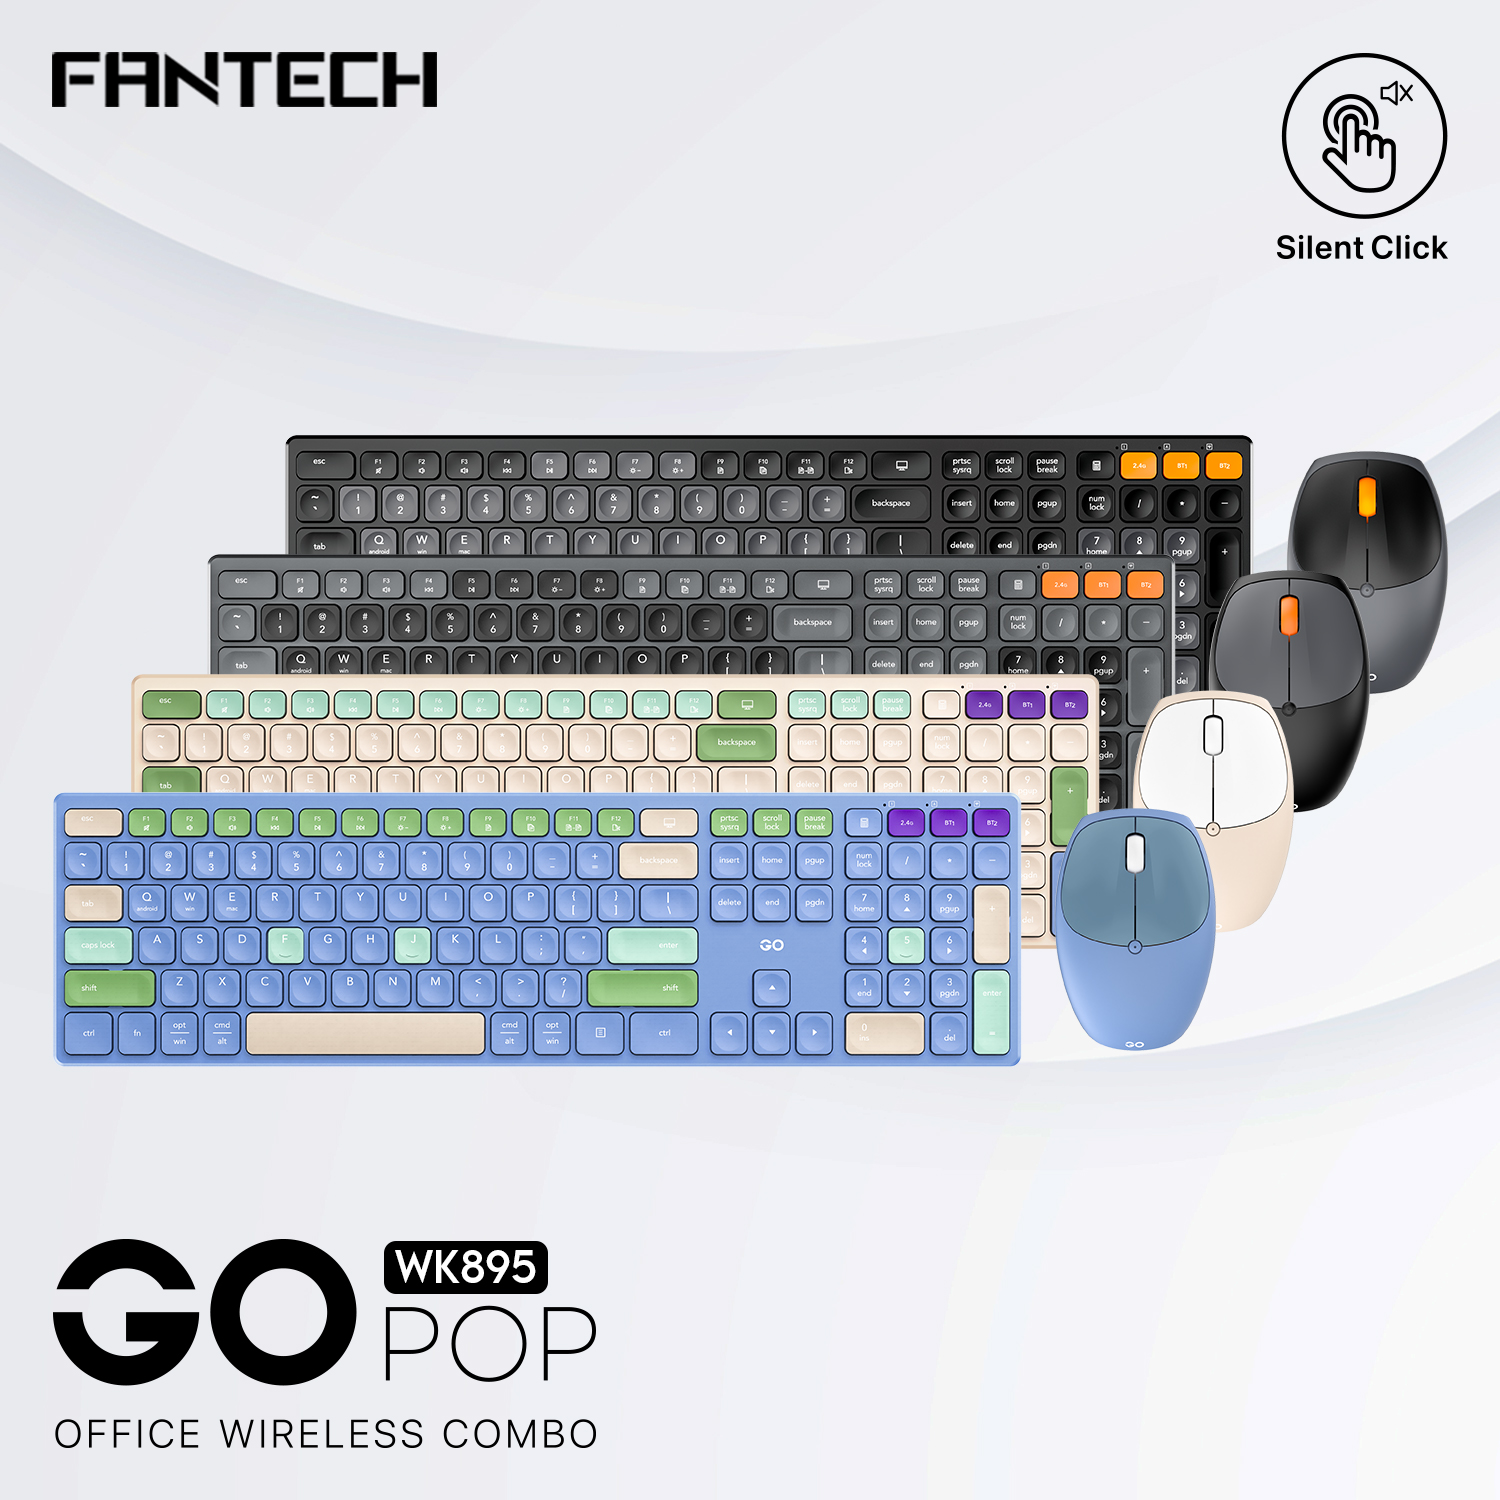 A large marketing image providing additional information about the product Fantech Go WK895 Office Wireless Keyboard and Mouse Combo - Black - Additional alt info not provided